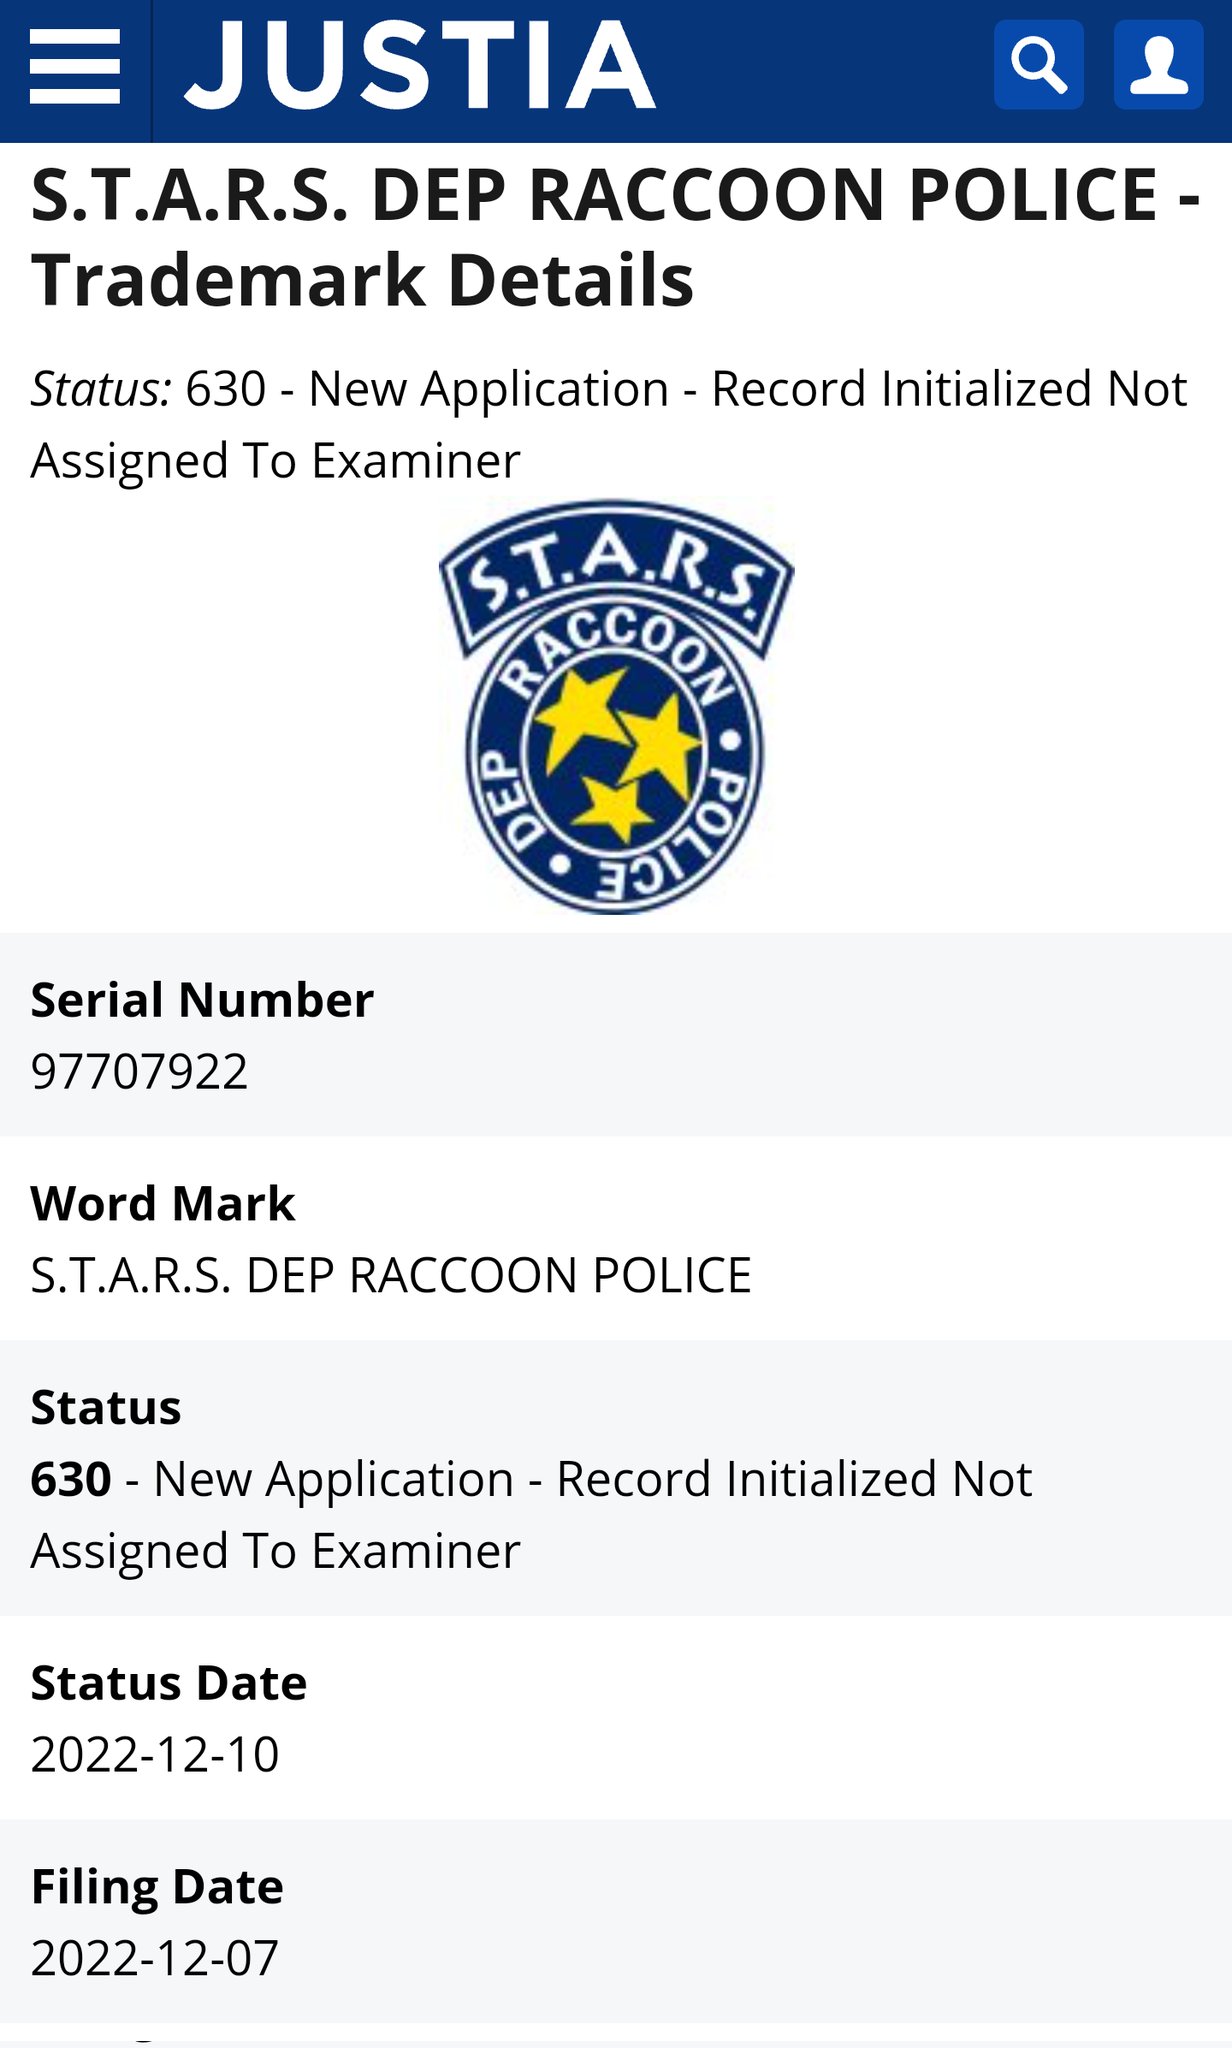 Trademark application for S.T.A.R.S. Dep Raccoon Police